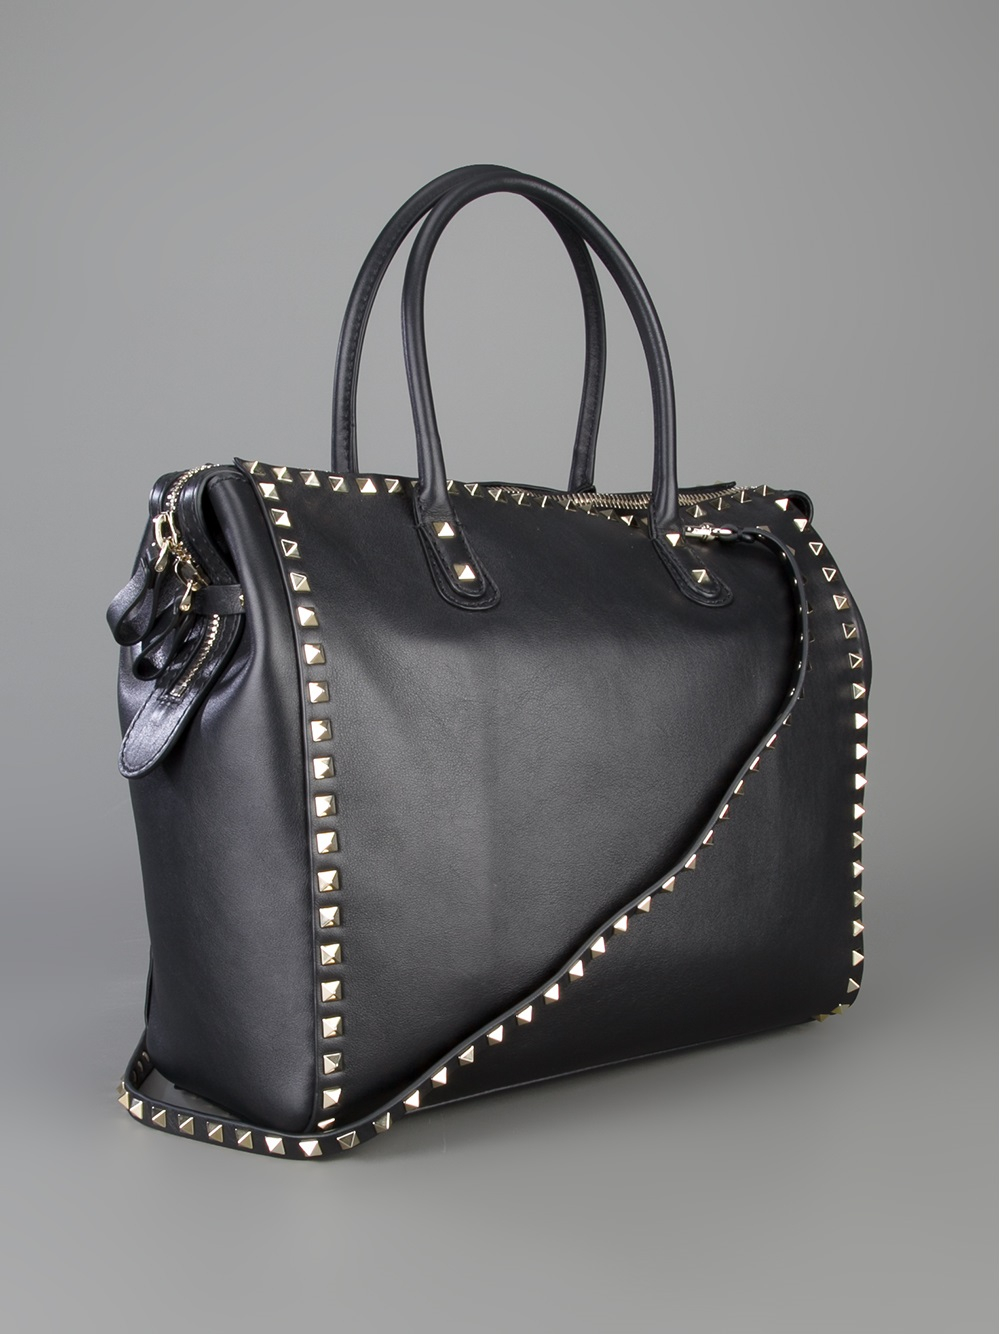 Valentino Studded Tote Bag in Black | Lyst